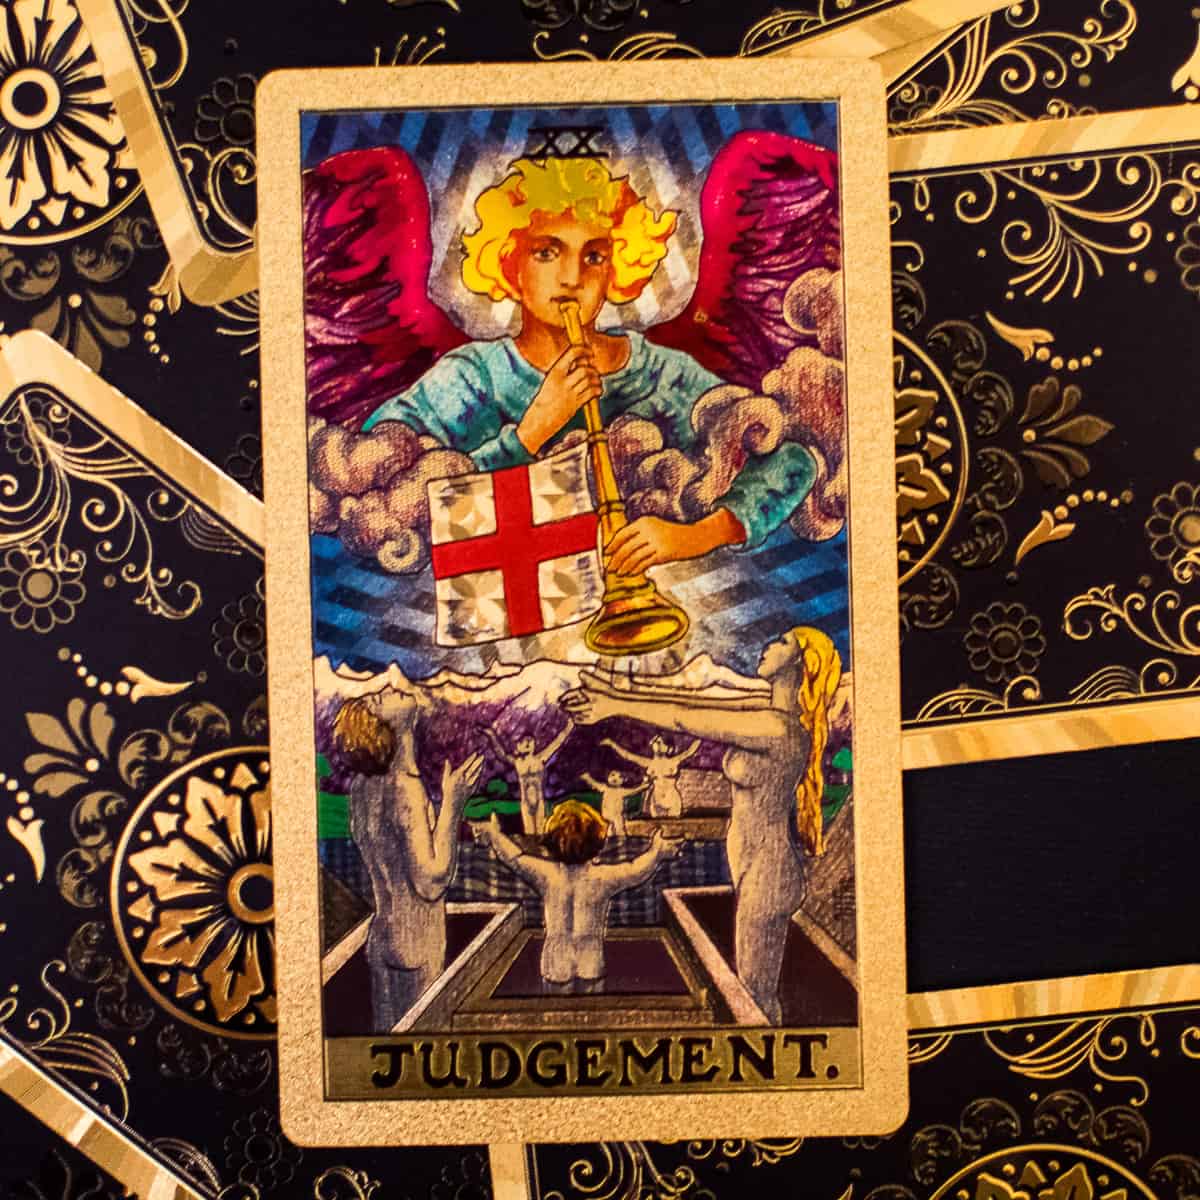 Angel harkening to bodies emerging from graves depicted on a tarot card.